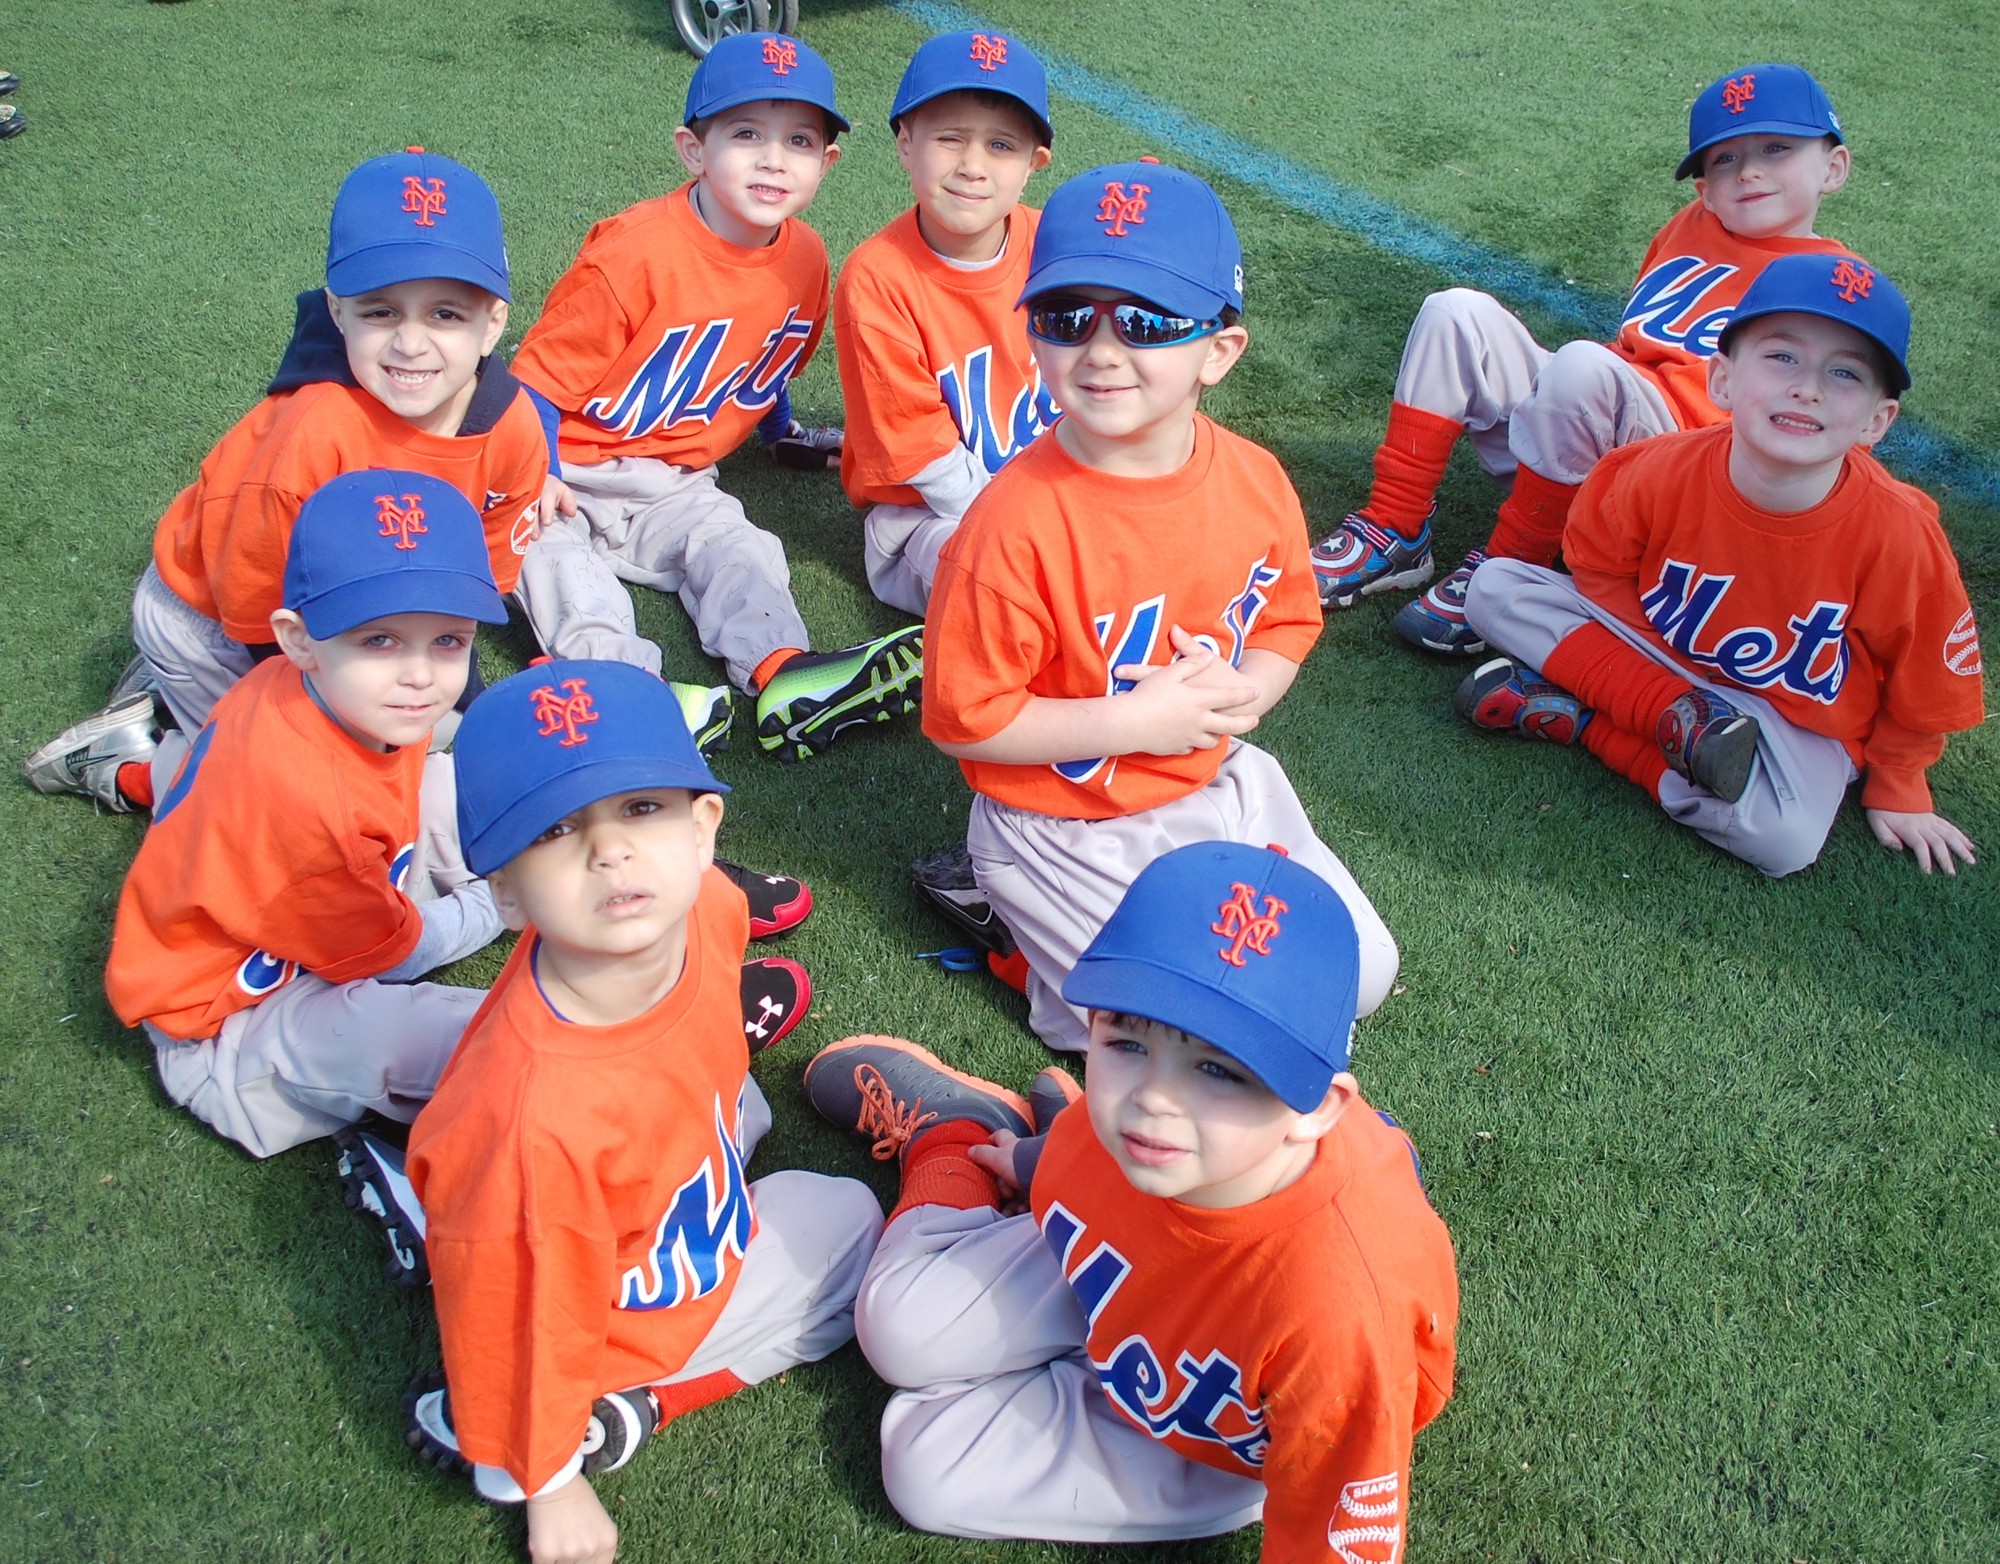 The Mets, liked their professional counterparts were all excited for the start of the new baseball season.